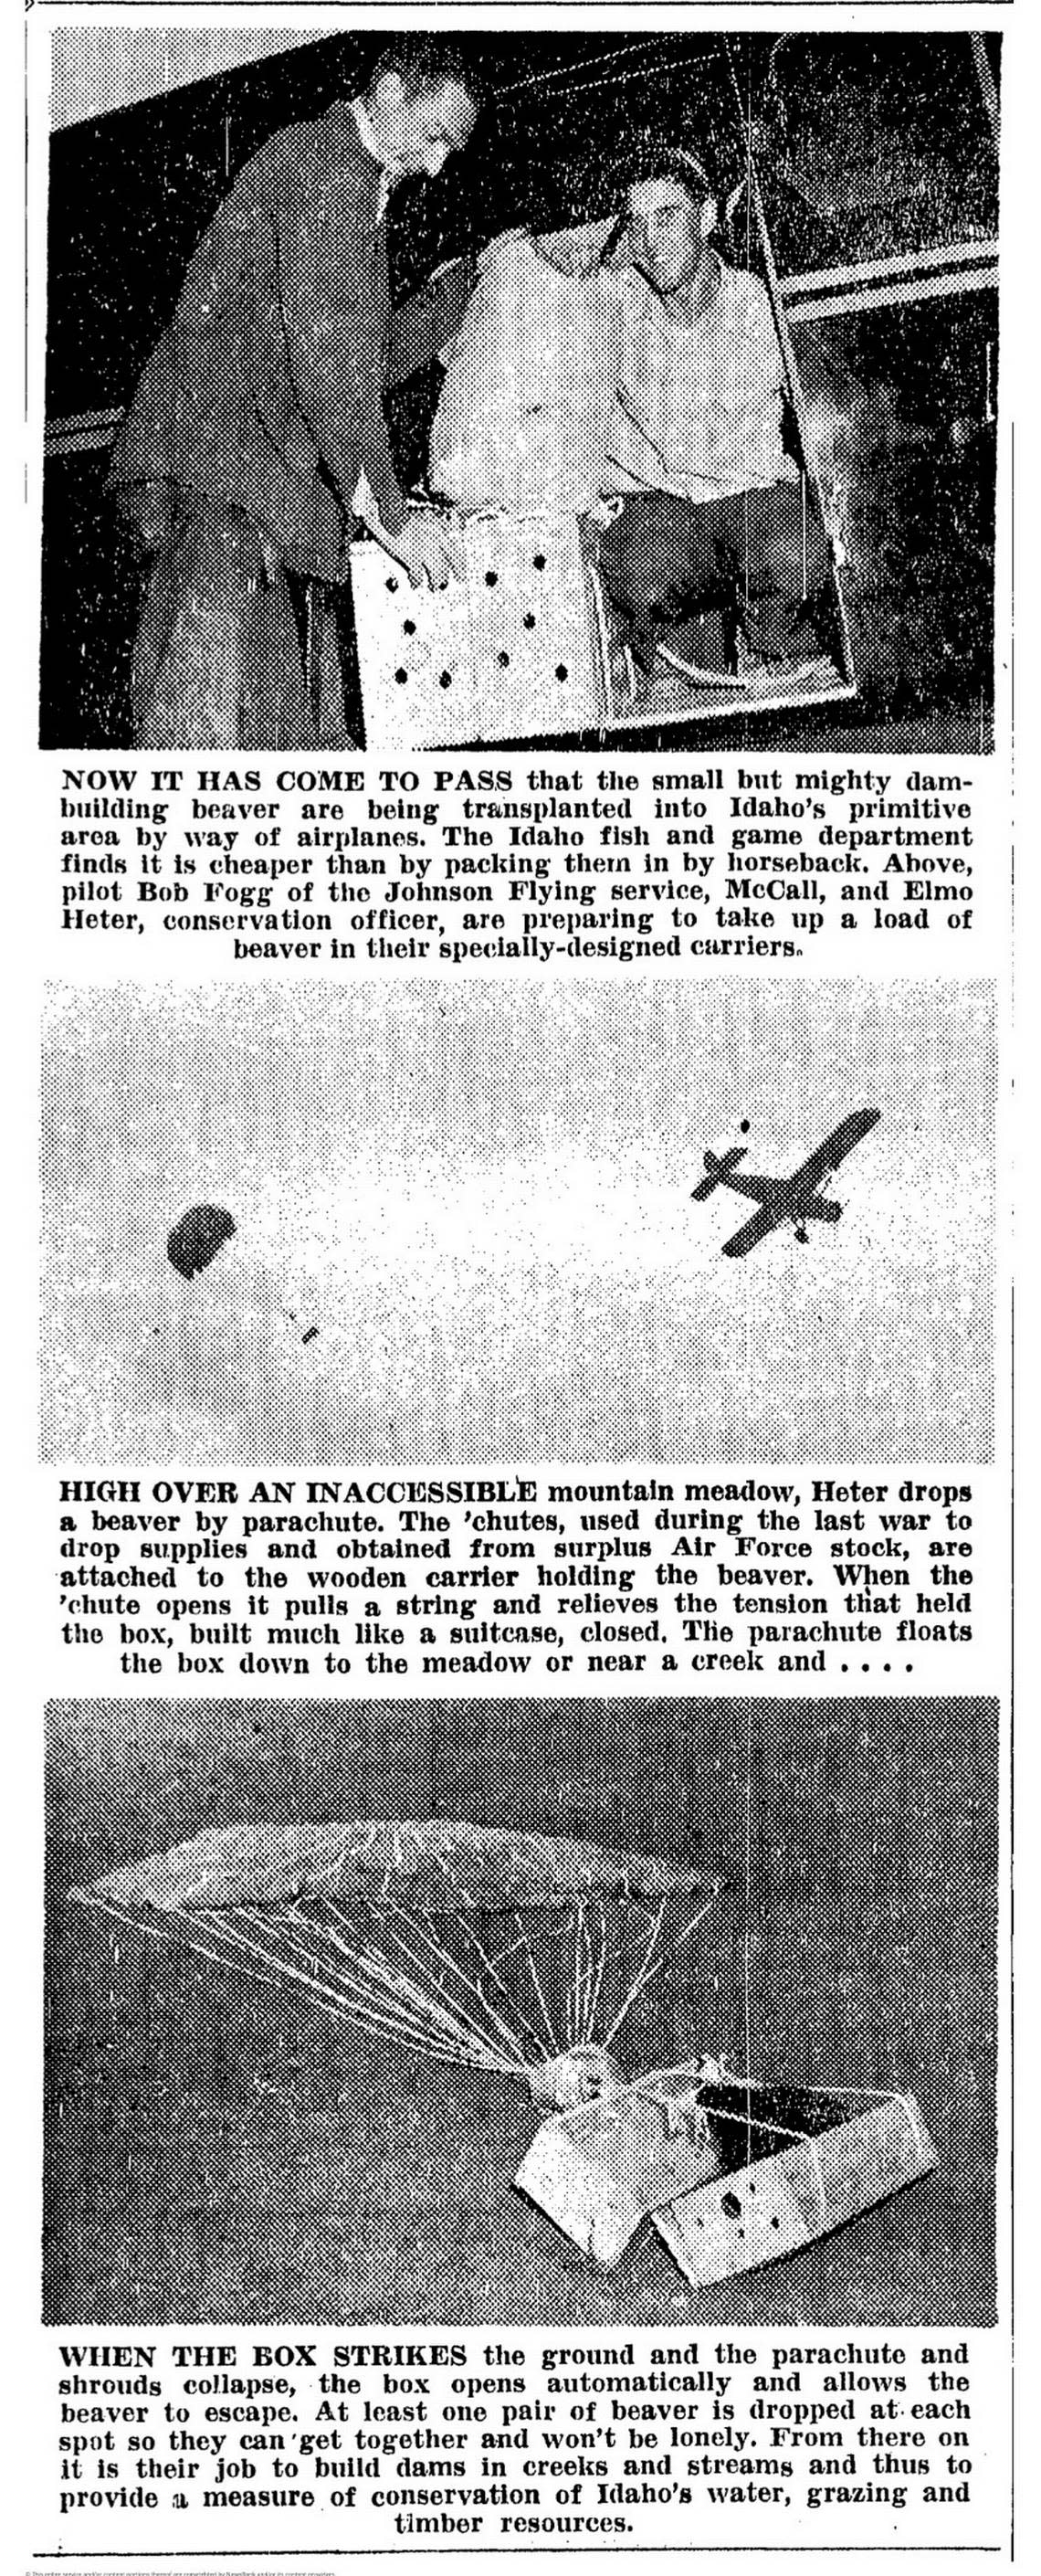 Images from the Aug. 26, 1948, issue of the Idaho Statesman document steps of the parachuting beaver relocation project.